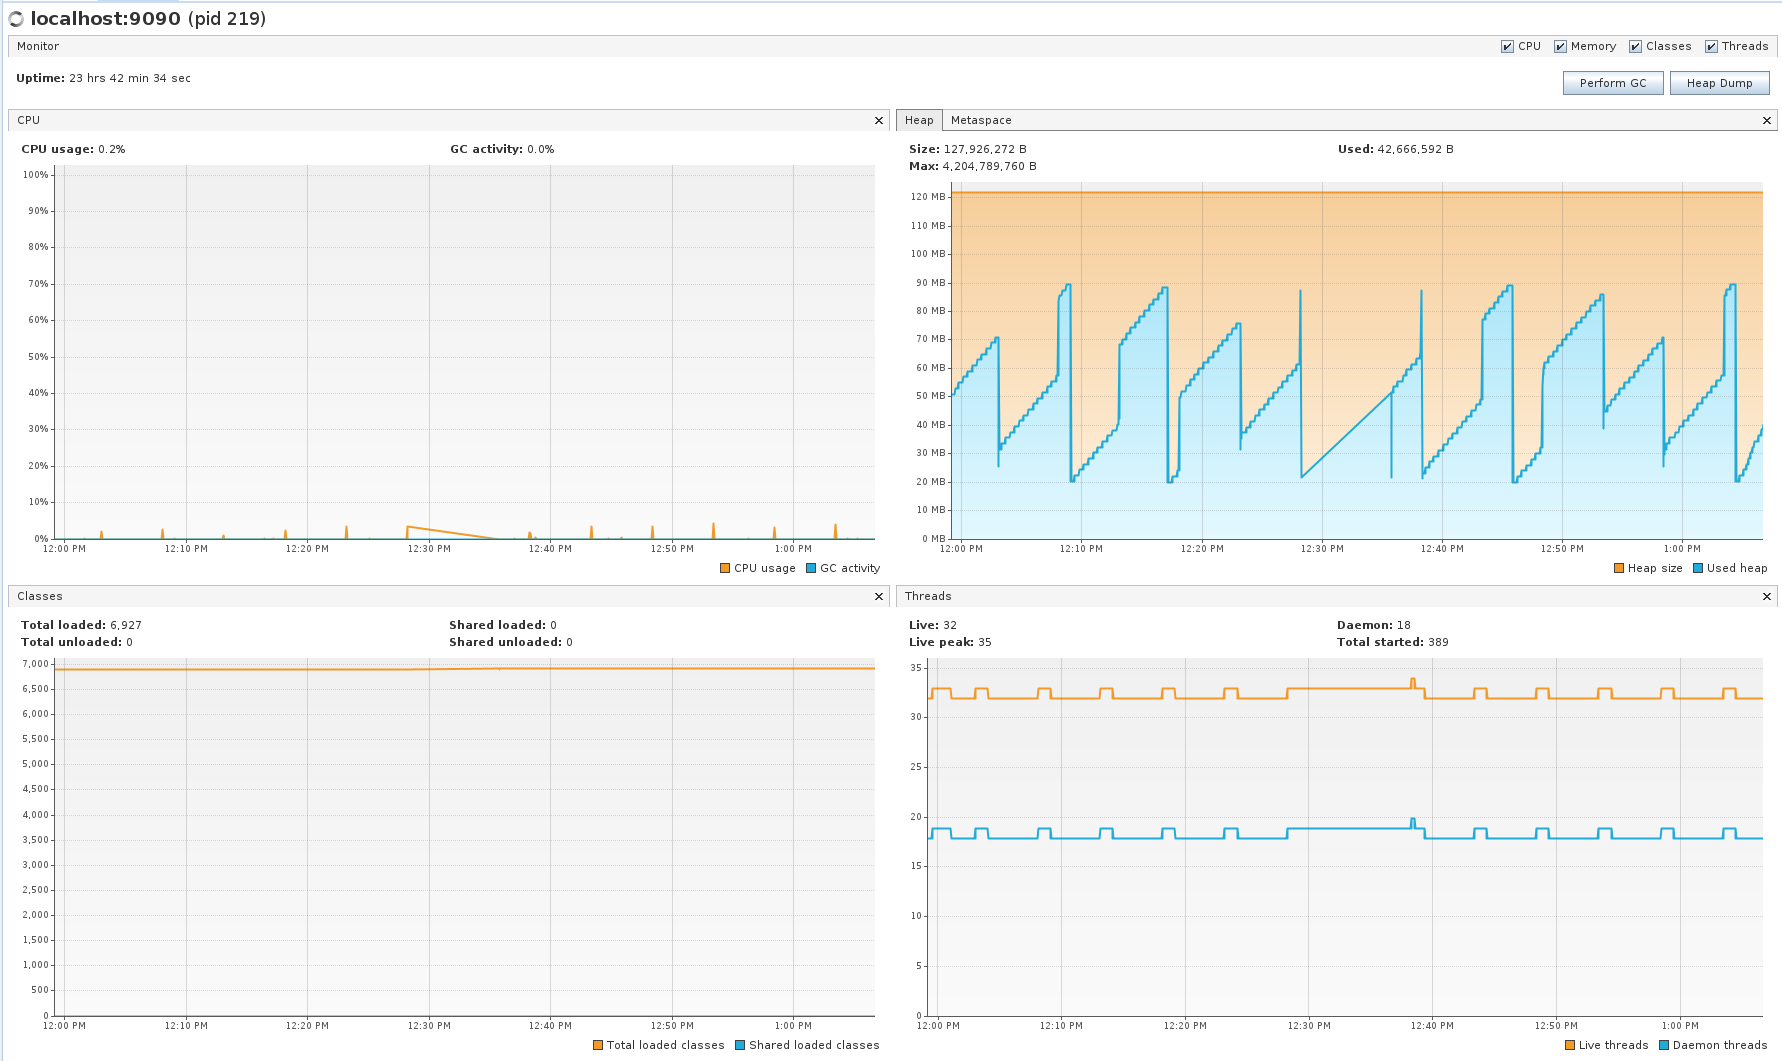 docs/development/devtools/testing/s3p/distribution-s3p-results/stability-monitor.png